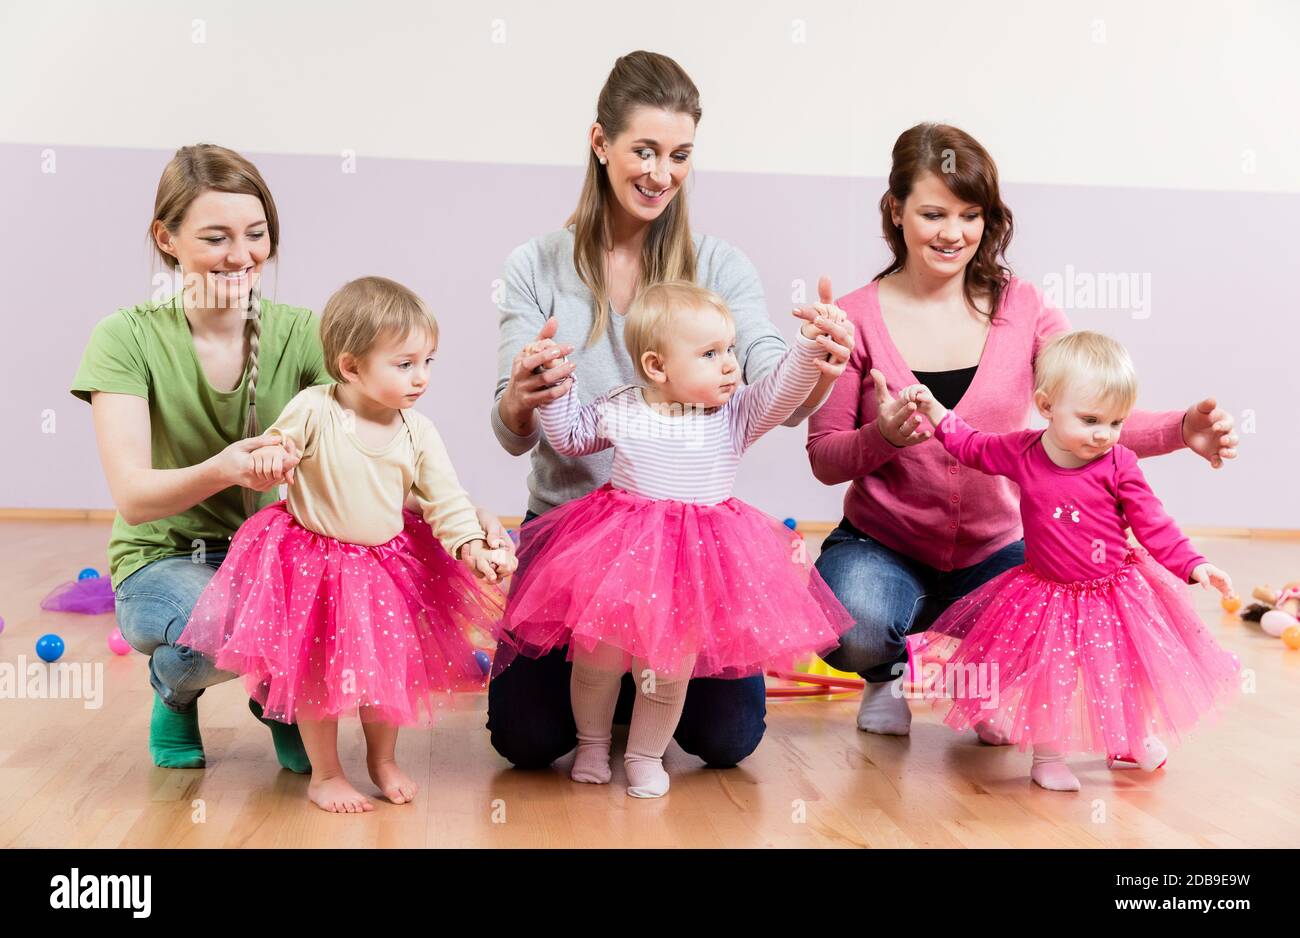 Three baby girls in pink skirts learning to walk with help of their mothers Stock Photo